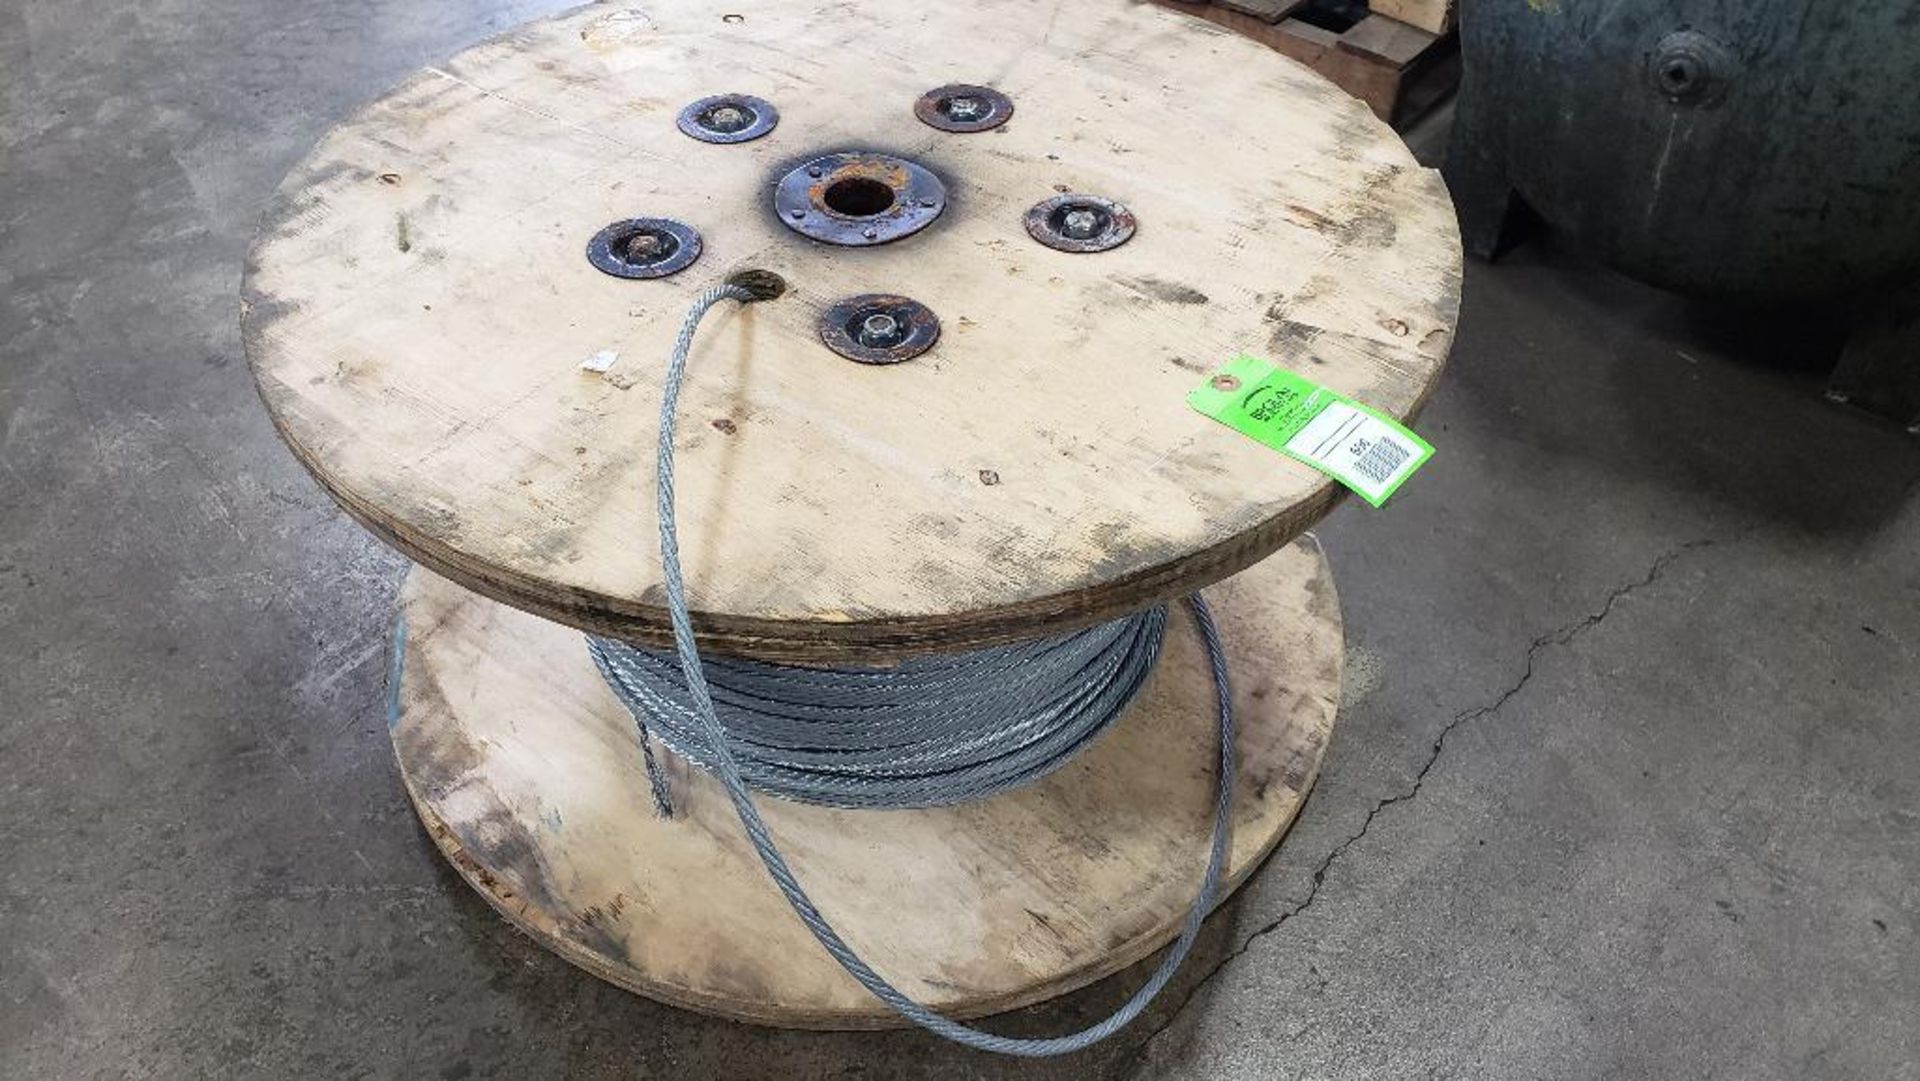 Spool of steel cable. Marked as 7.6mm cable.